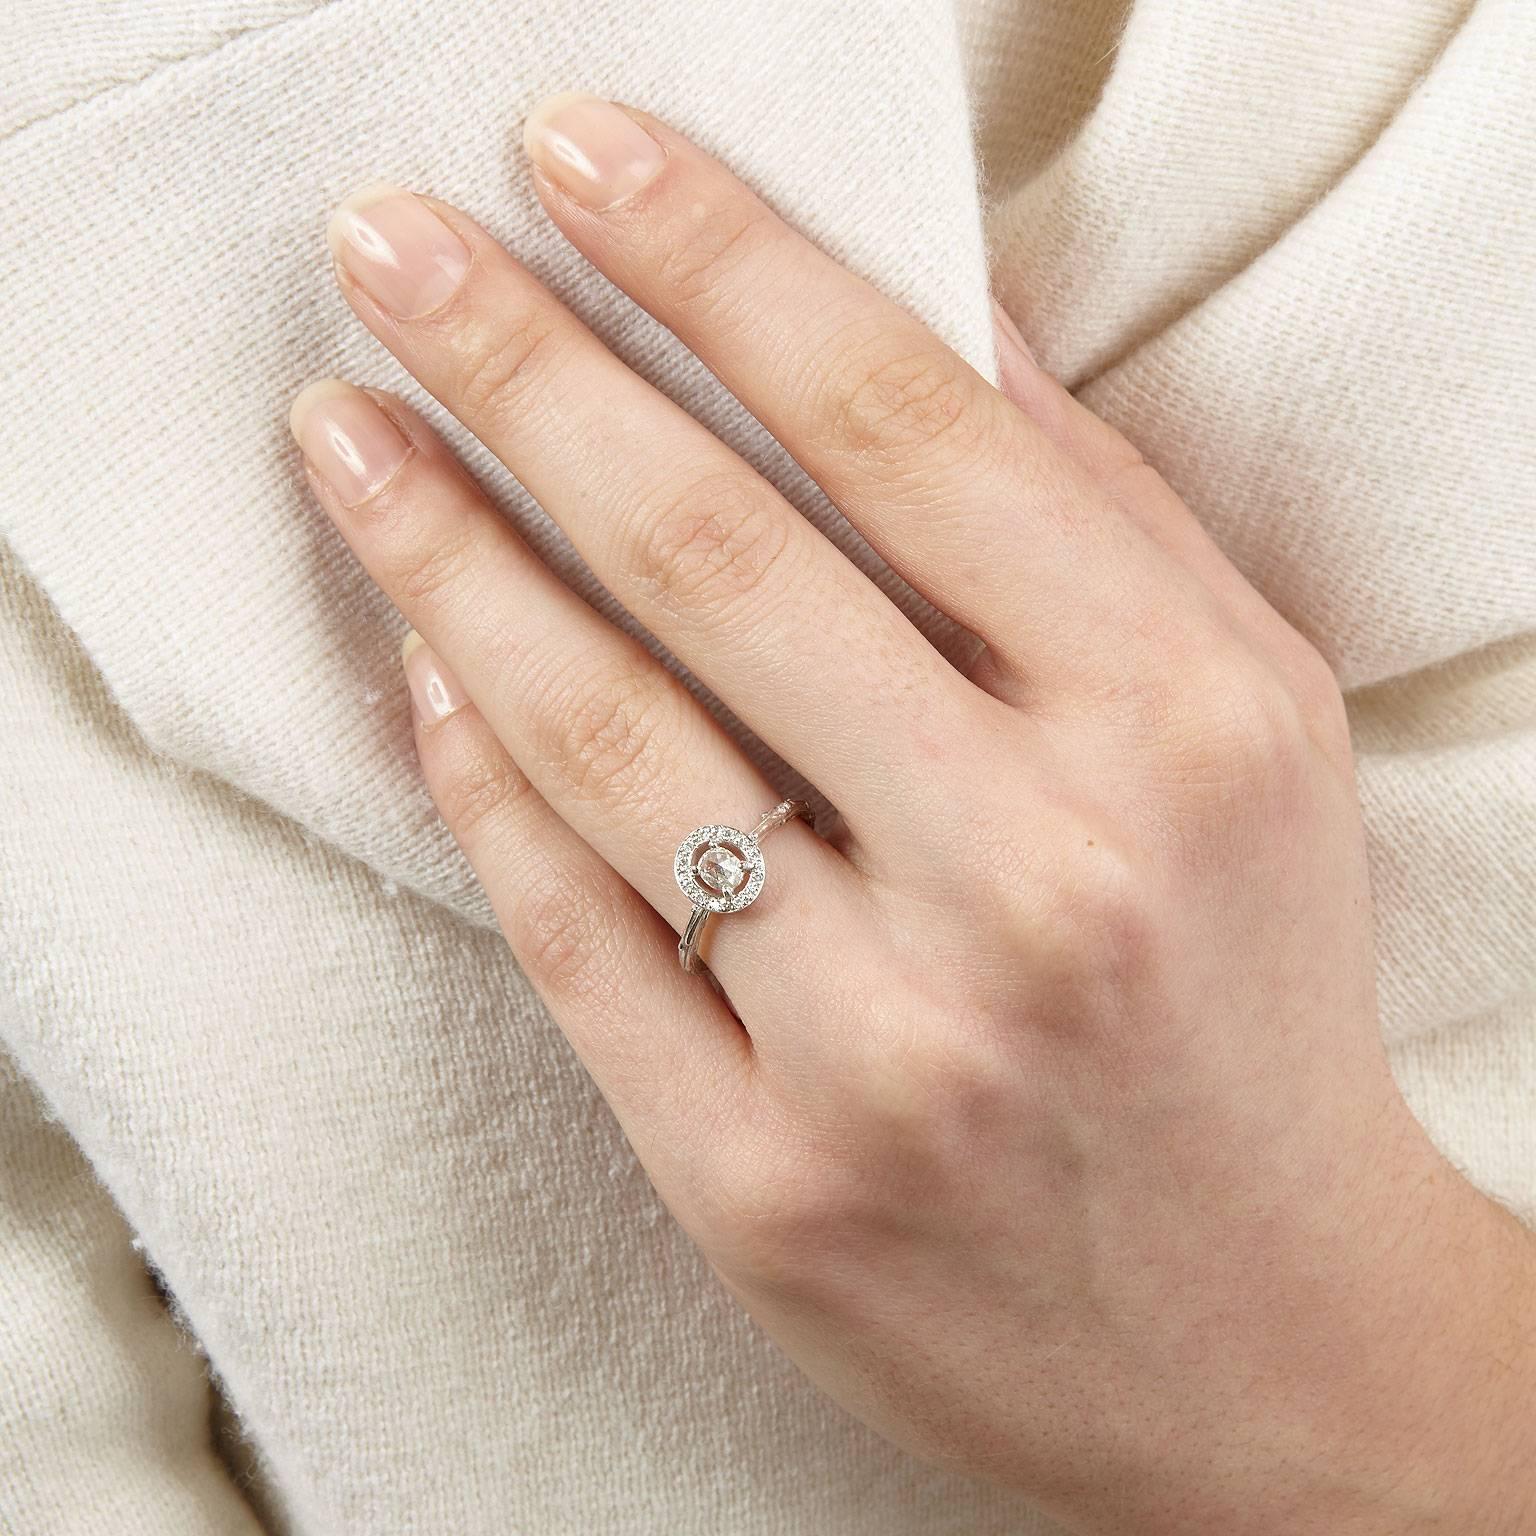 The Titania ring features a beautiful oval rose cut diamond surrounded by a halo of small round brilliants. Mixing a traditional style setting with a textured twig band for a contemporary twist.
This is one seriously sparkly ring - perfect if